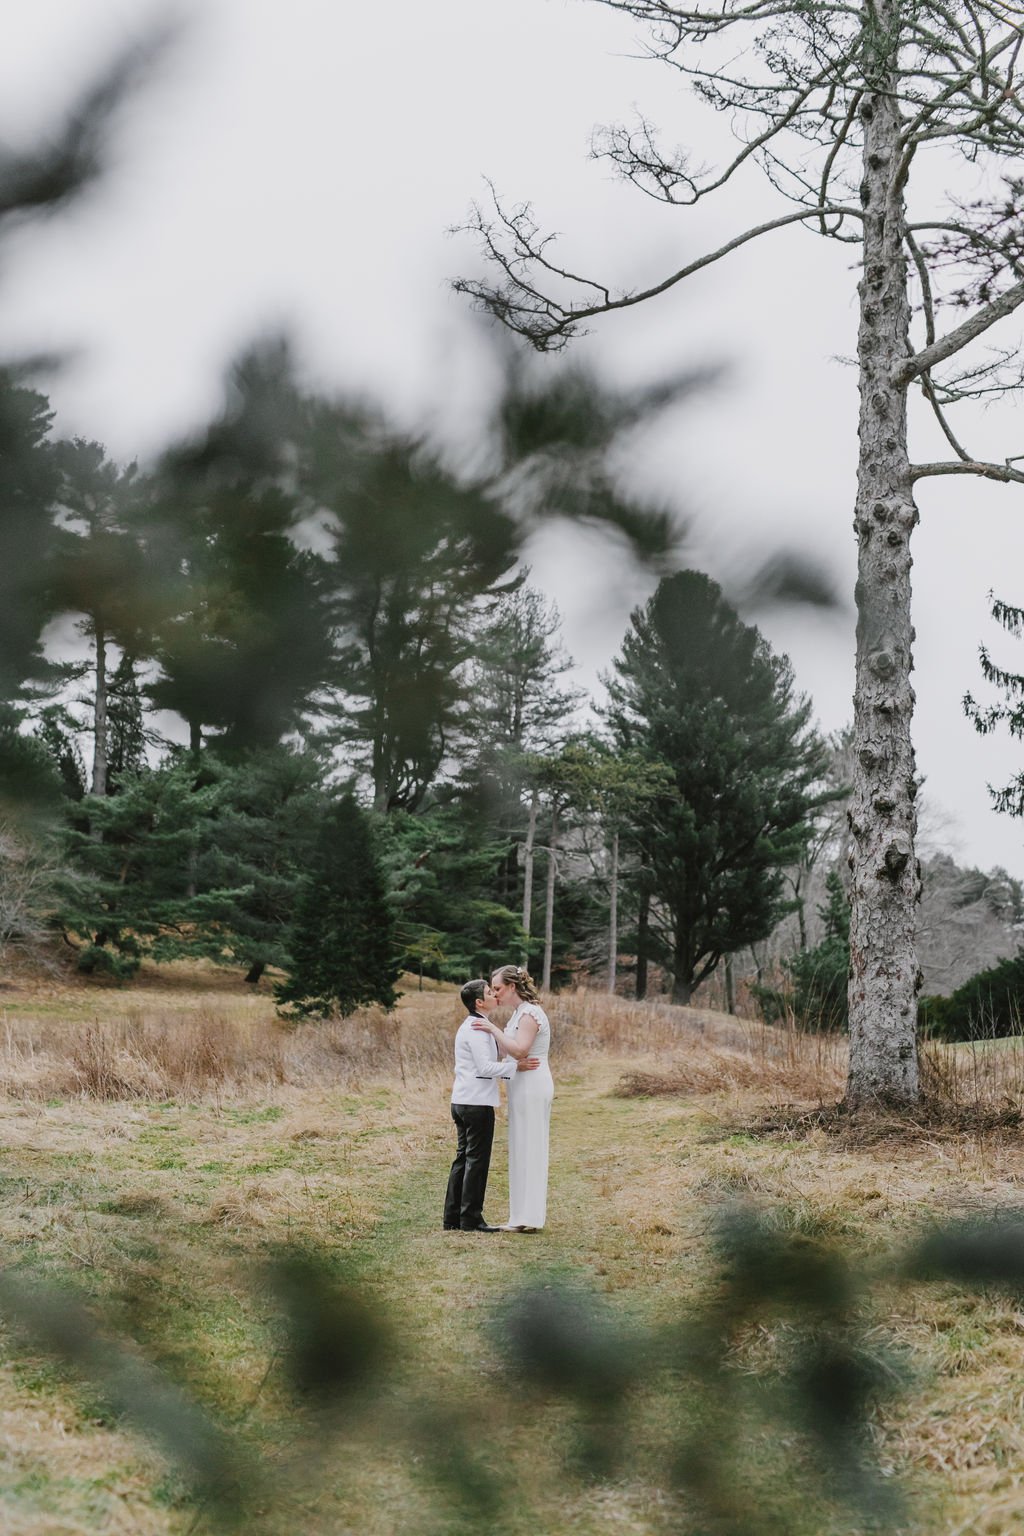 Tobey+Lindsey'sWedding-EmilyTebbettsPhotography-44 Intimate Queer Lesbian LGBTQ Winter Boston Arboretum Jamaica Plain Roslindale Wedding at the Milky Way Lounge and Restaurant in Massachusetts new england by queer elopement photographer .jpg